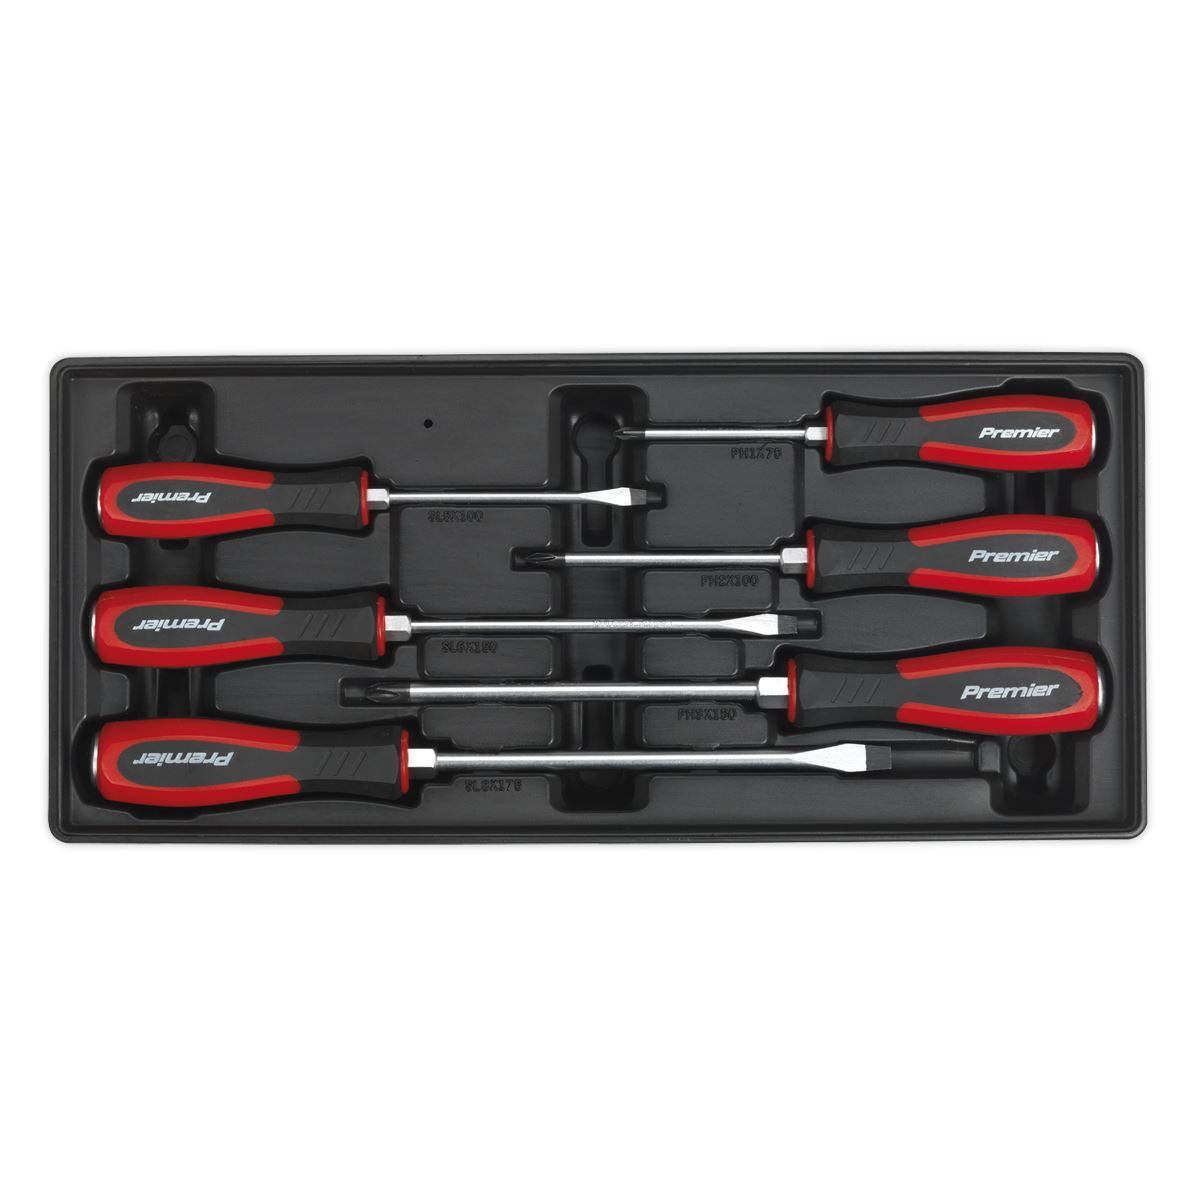 Sealey Tool Tray with Hammer-Thru Screwdriver Set 6pc TBT29